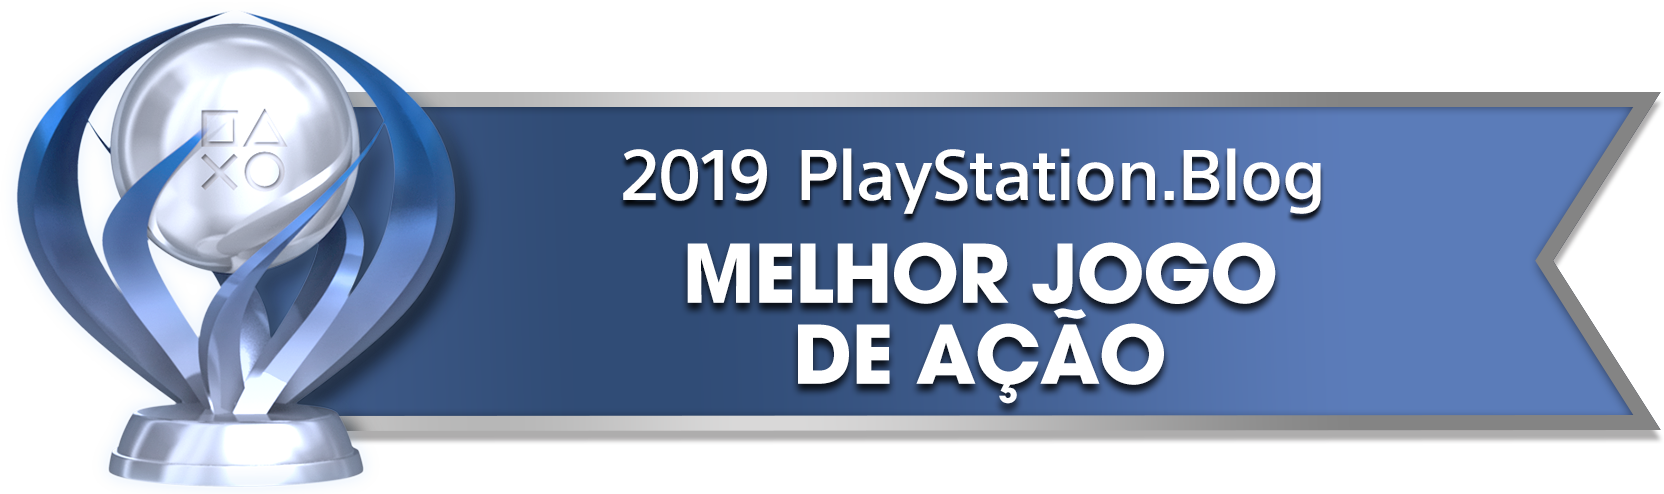 PS Blog Game of the Year 2019 - Best Action Game - 1 - Platinum